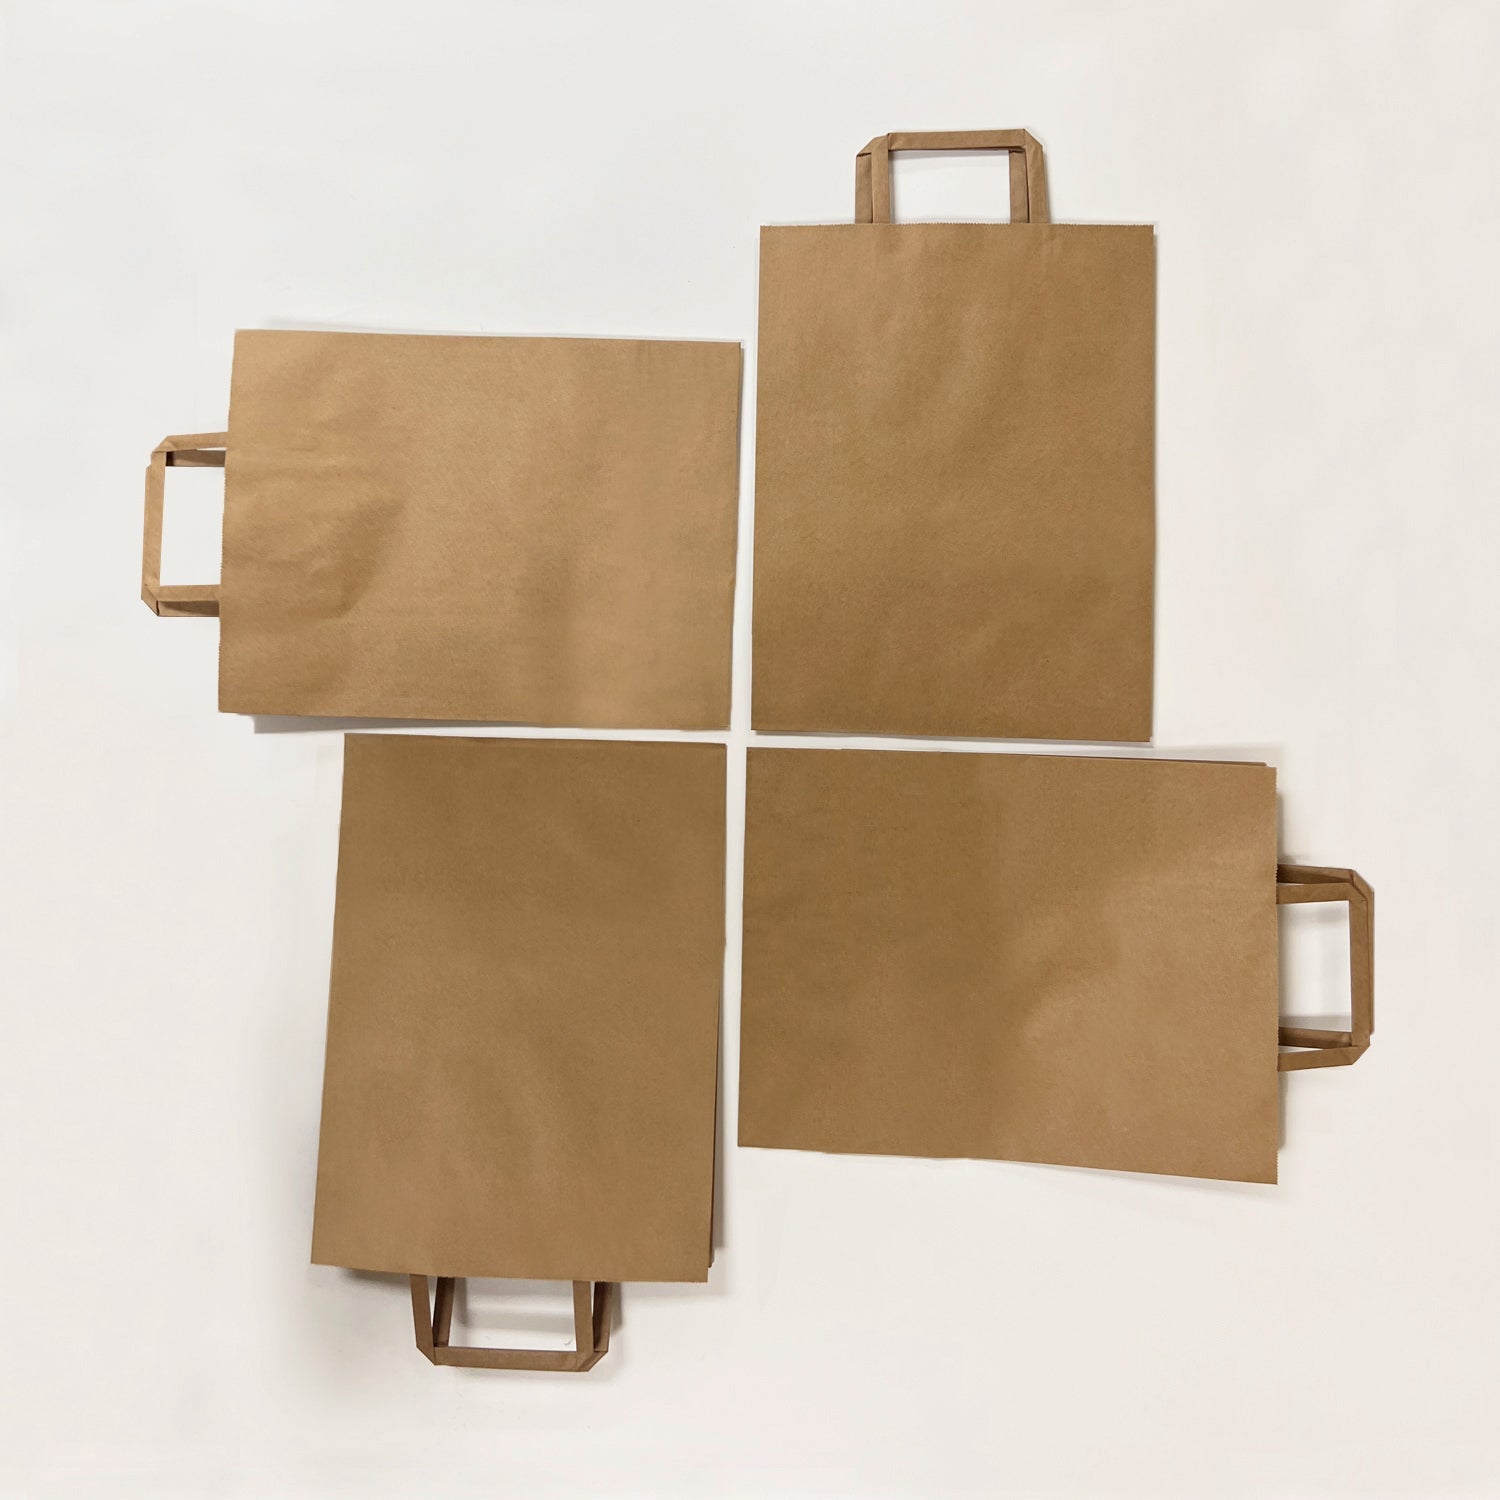 300 Pcs, Debbie, 10x5x13 inches, Kraft Paper Bags, with Flat Handle